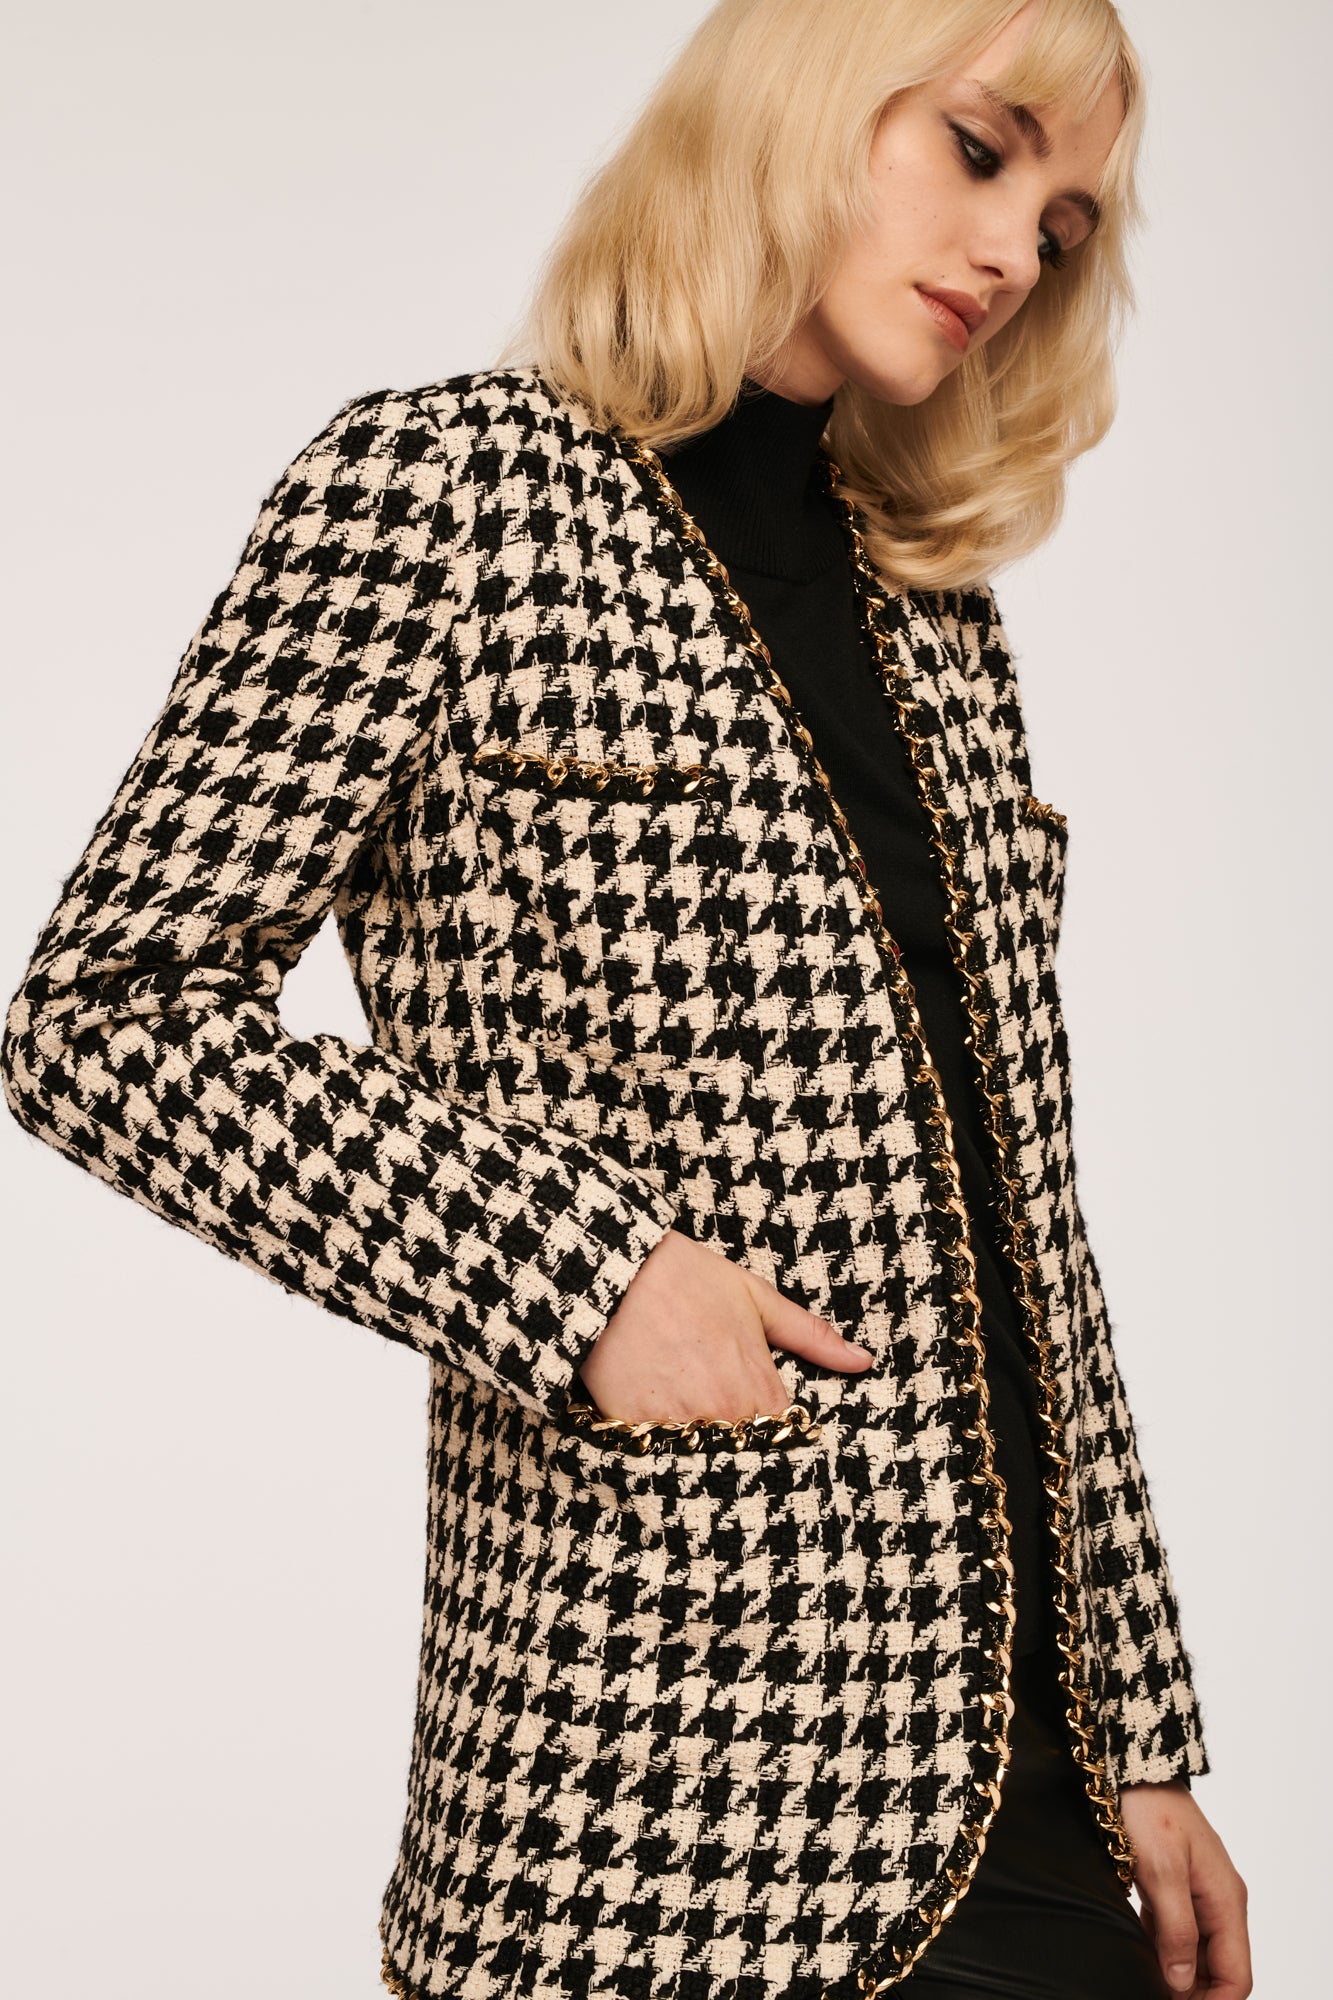 Long Tweed Jacket with Houndstooth Pattern